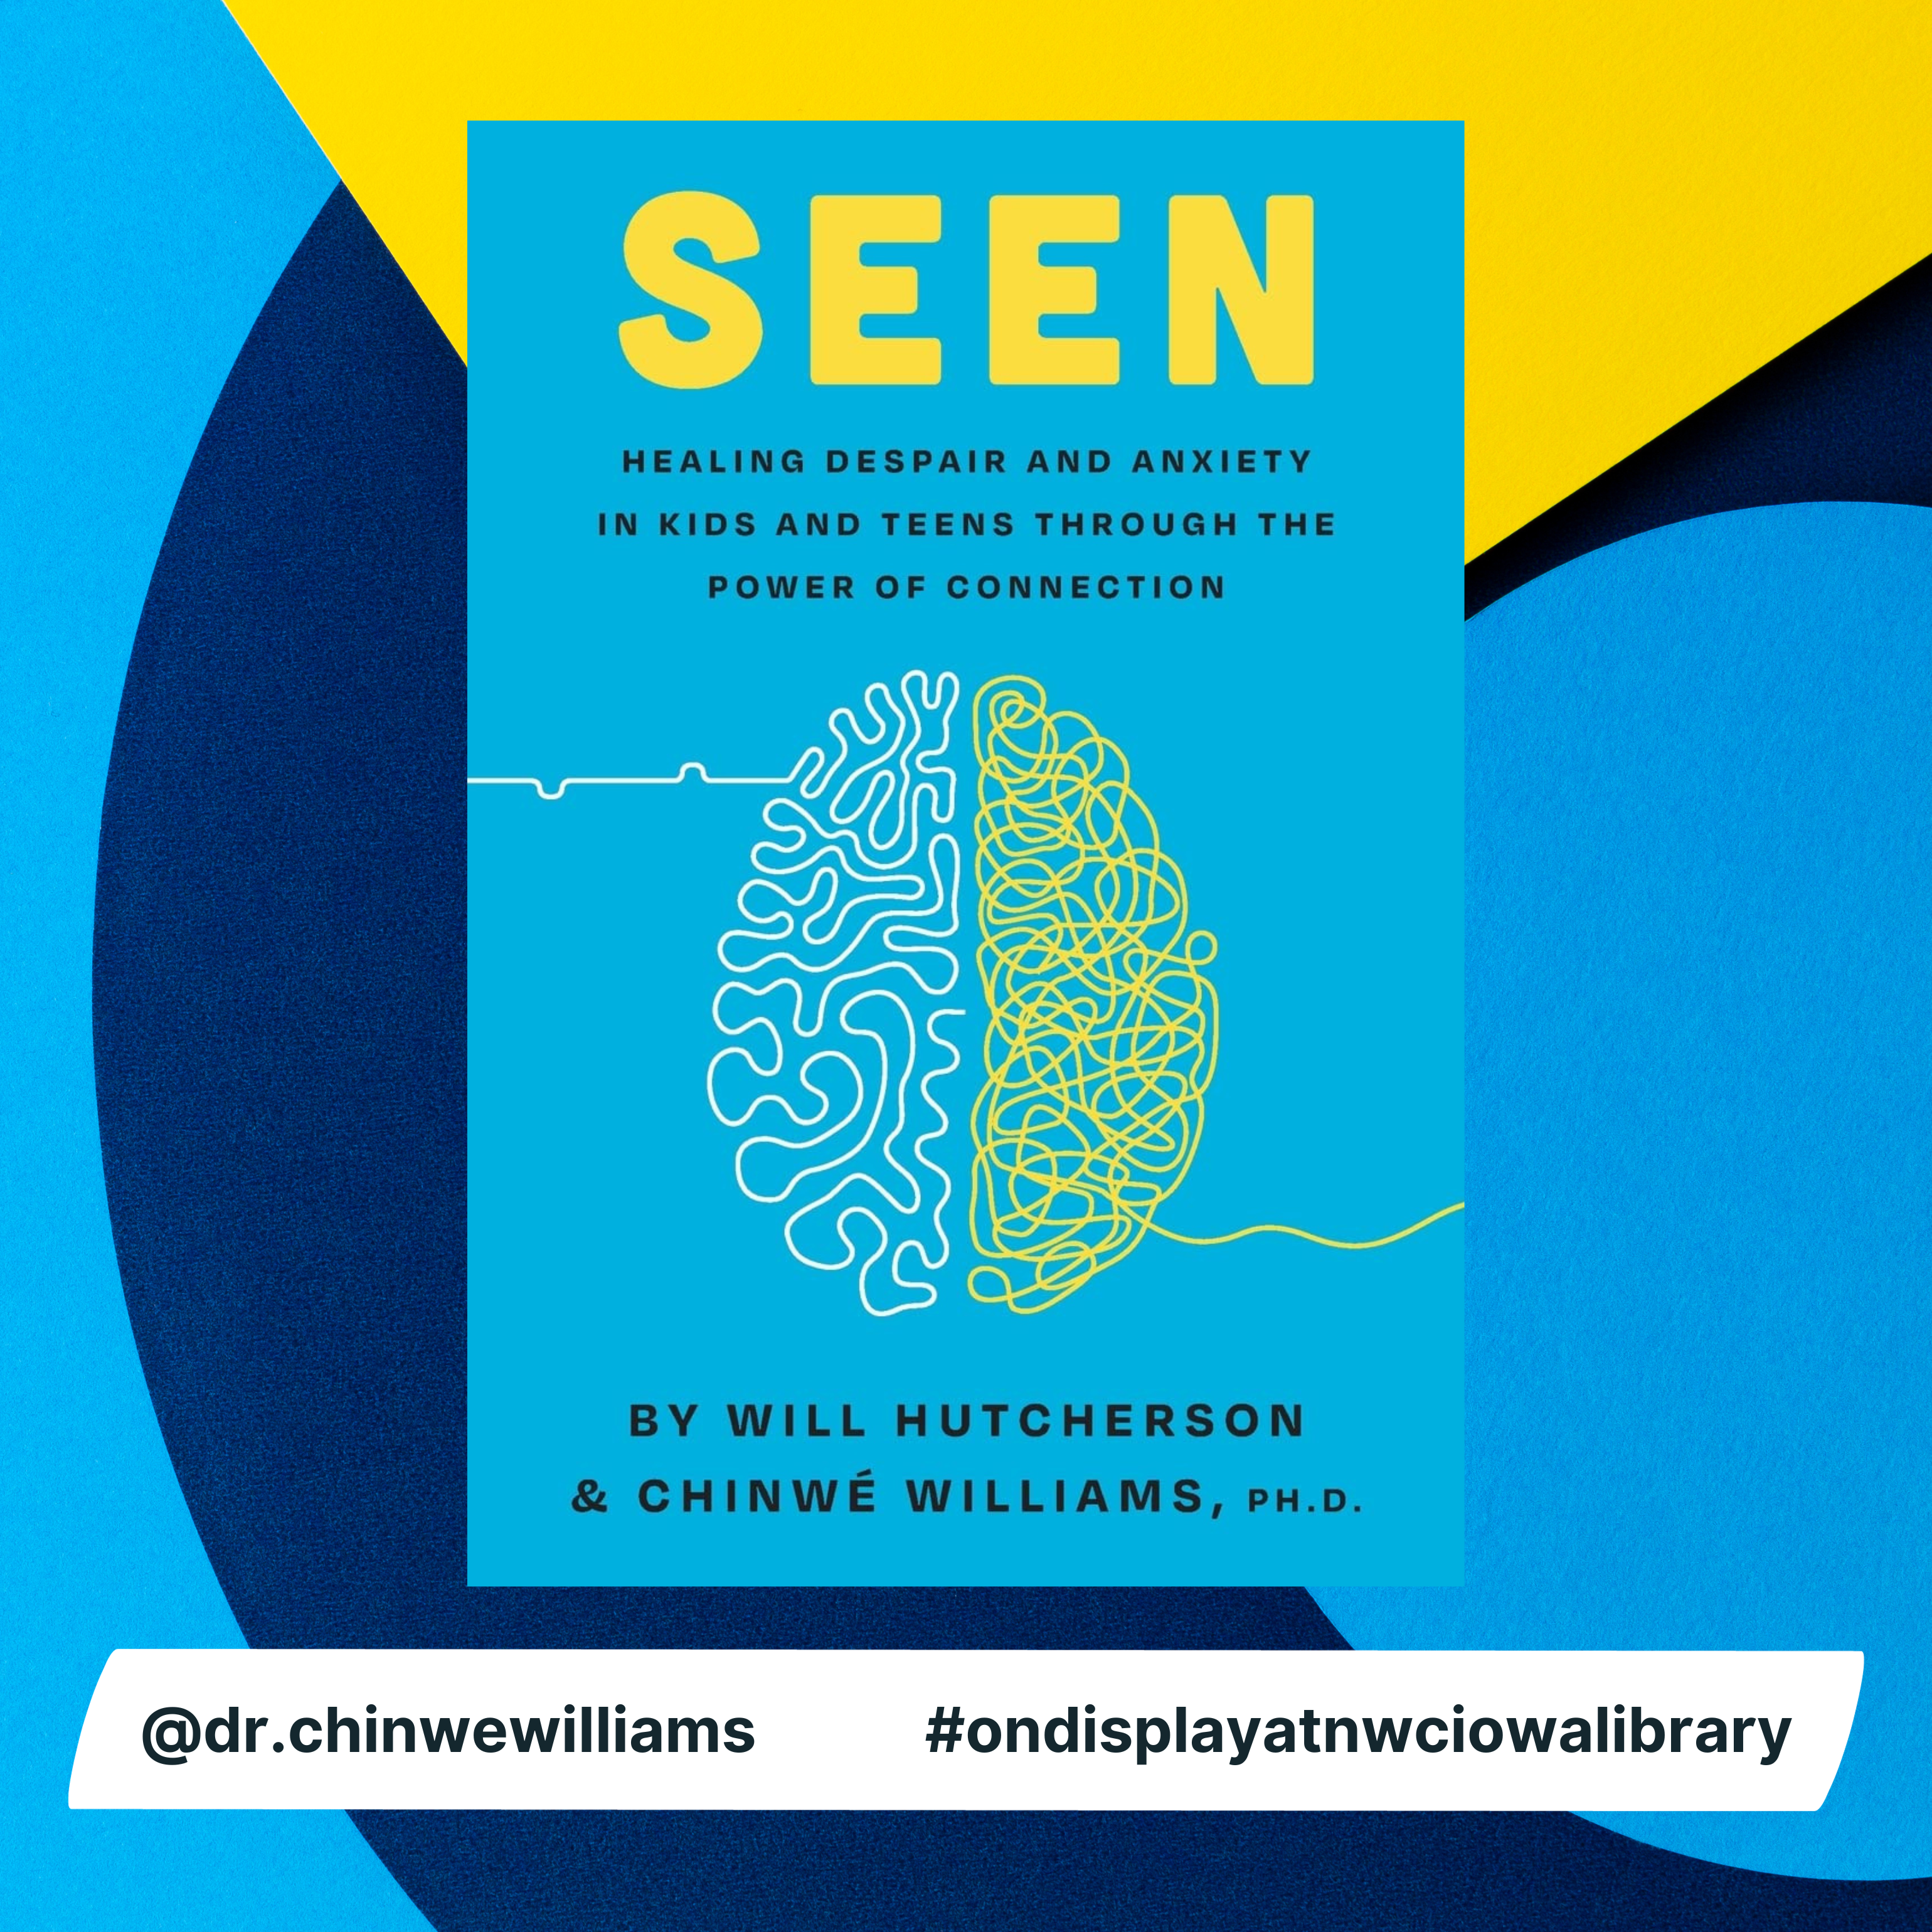 Seen: Healing Despair and Anxiety in Kids and Teens Through the Power of Connection by Dr. Chinwé Williams and Will Hutcherson.